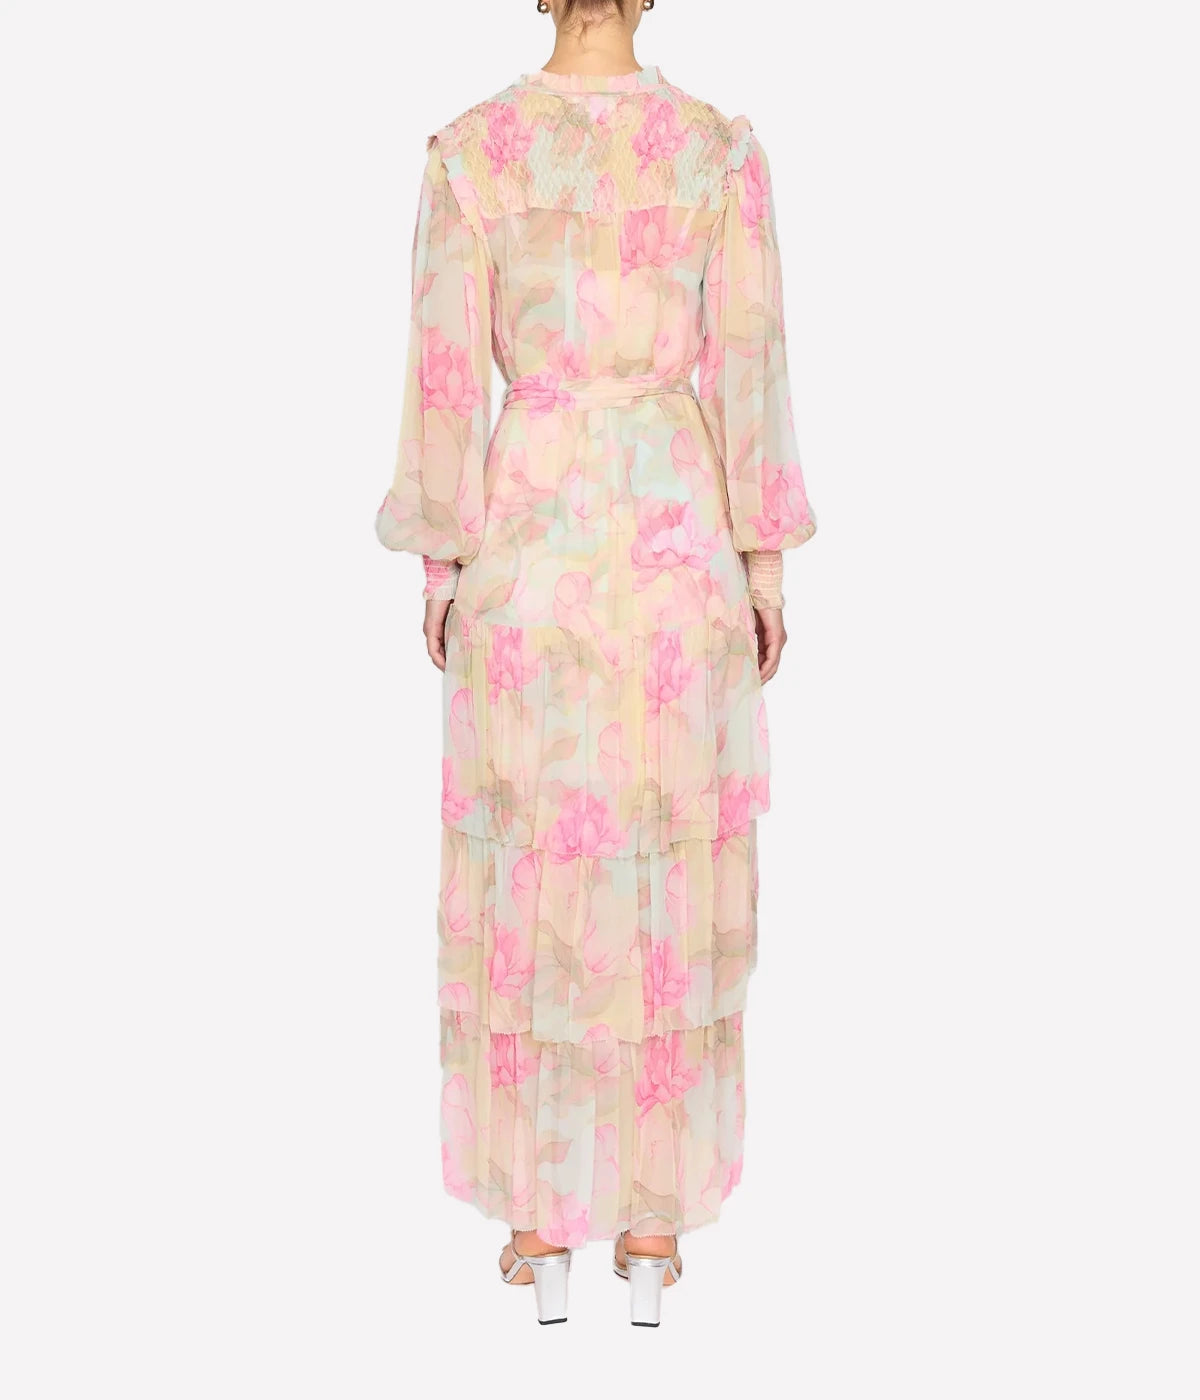 Ana Dress in Waterlily Pink